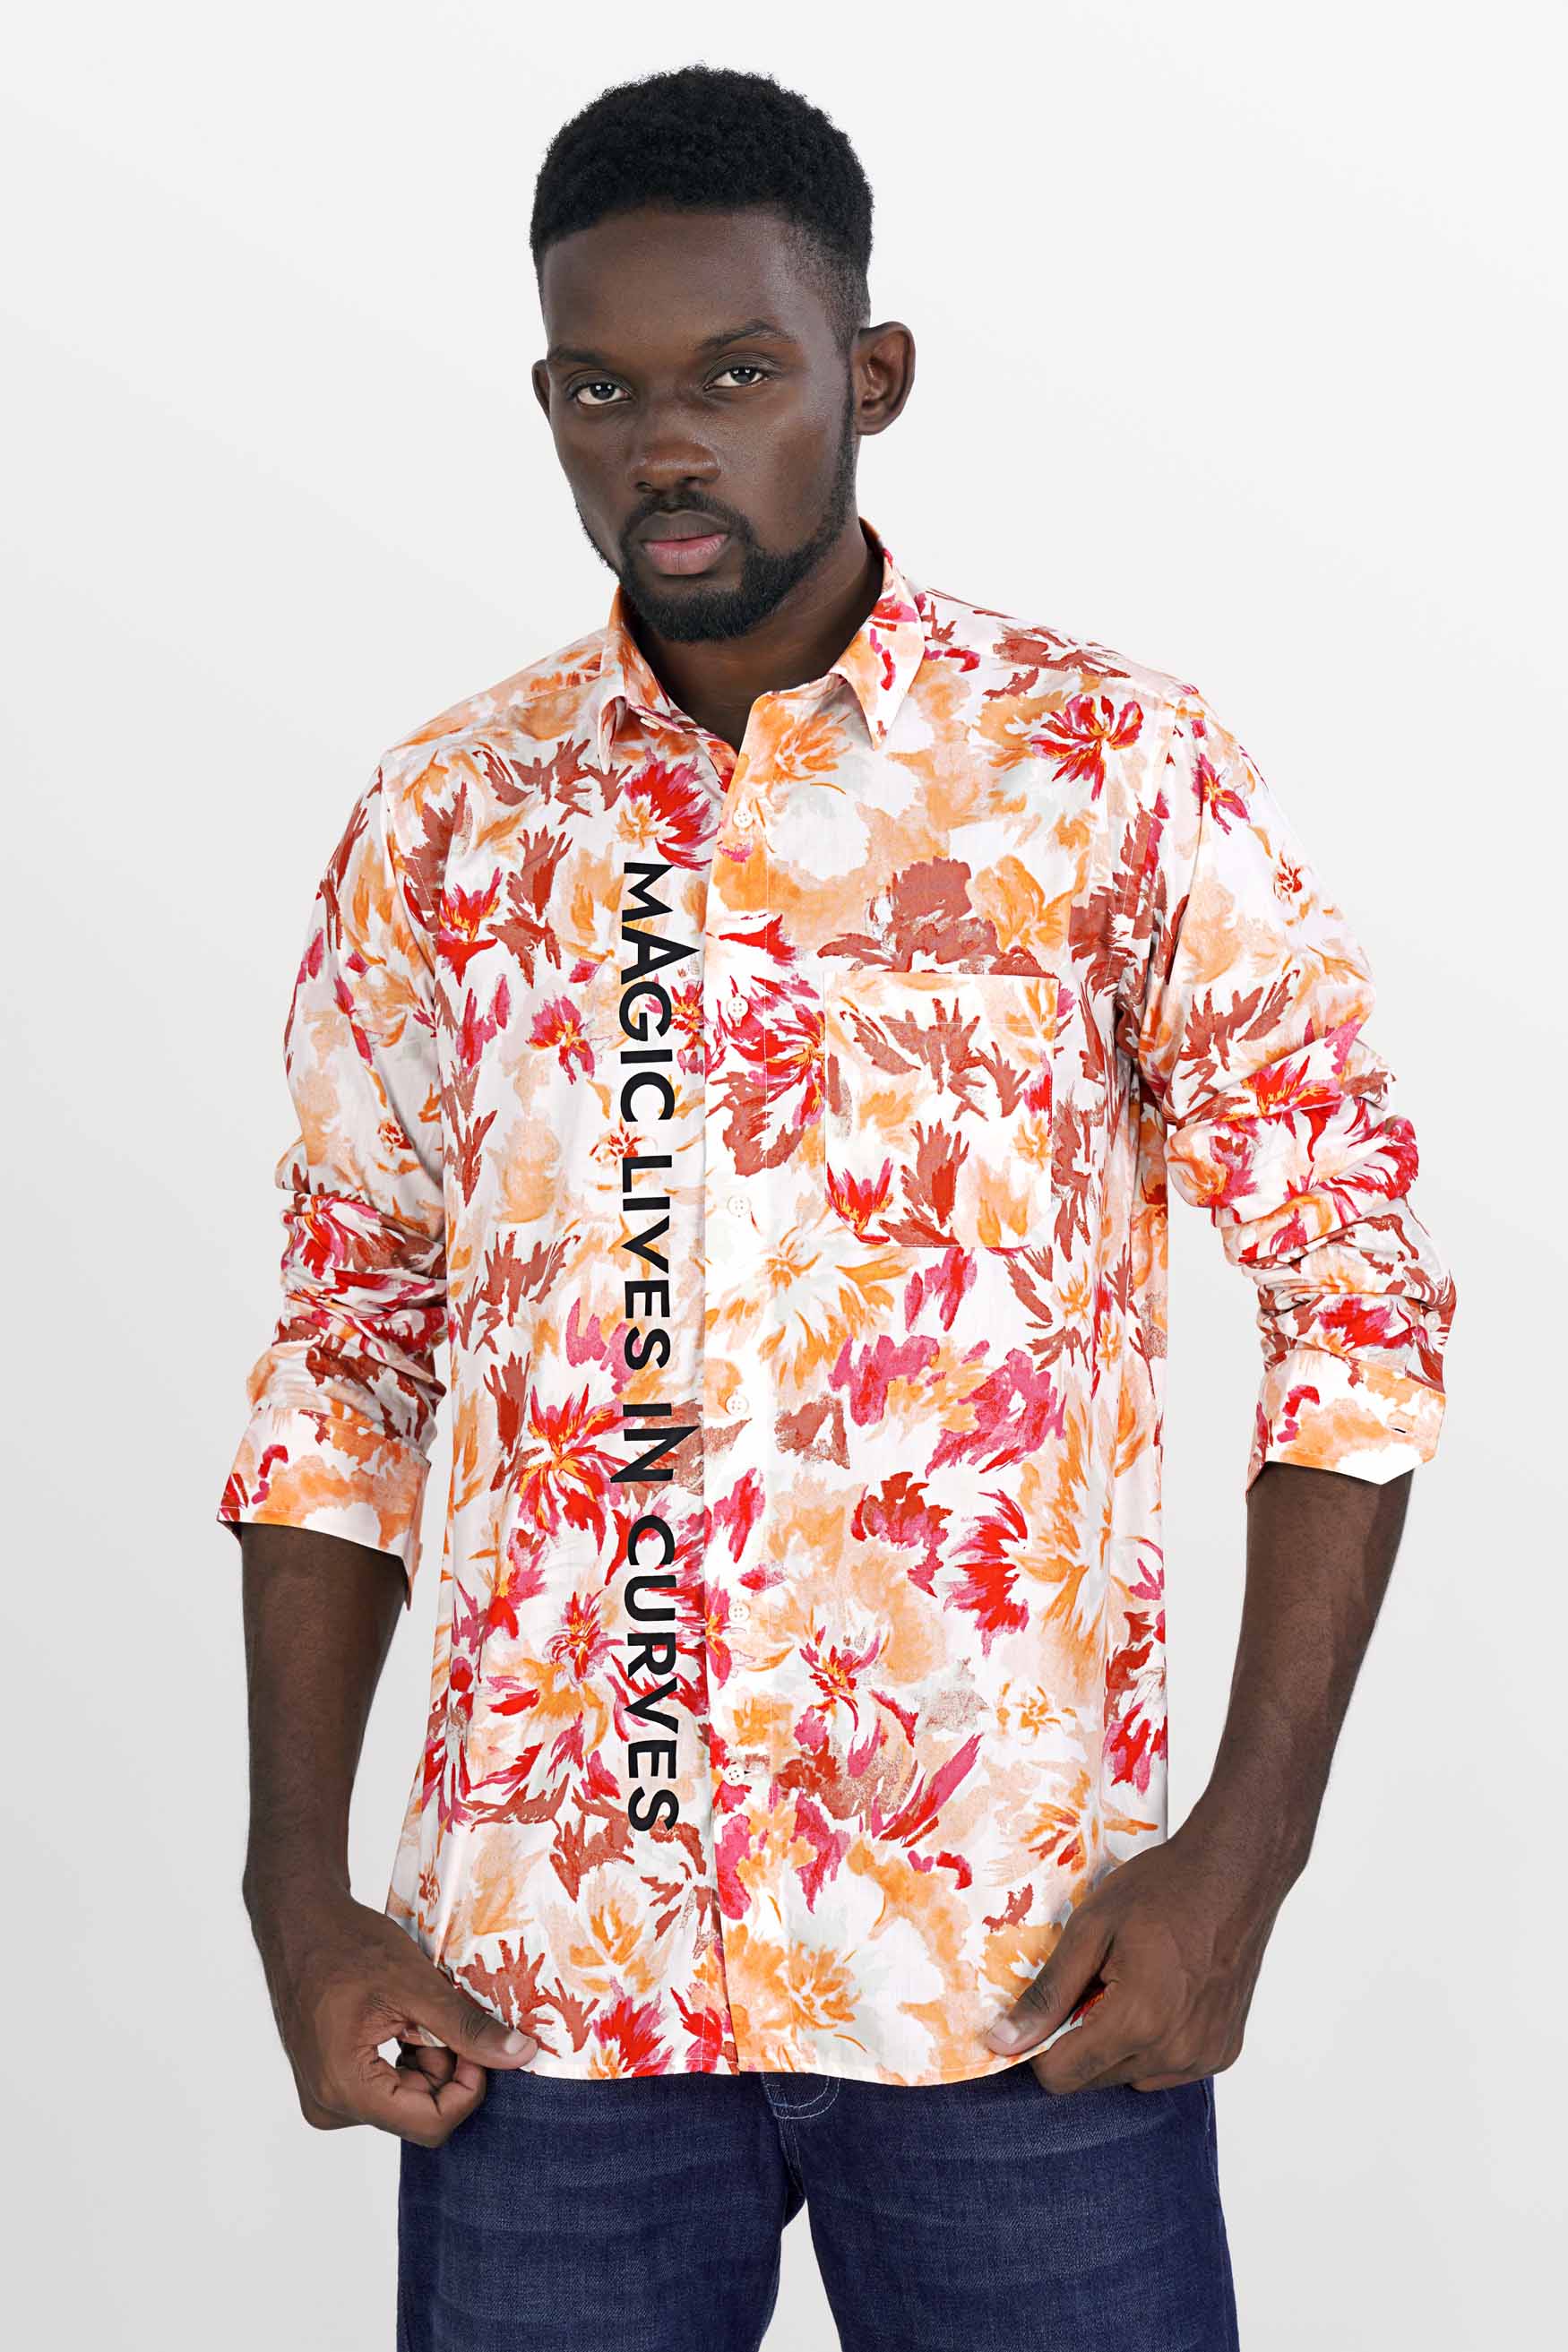 Bright White with Persimmon Red and Tangerine Brown Funky Printed Premium Cotton Designer Shirt 8073-RPRT70-38, 8073-RPRT70-H-38, 8073-RPRT70-39, 8073-RPRT70-H-39, 8073-RPRT70-40, 8073-RPRT70-H-40, 8073-RPRT70-42, 8073-RPRT70-H-42, 8073-RPRT70-44, 8073-RPRT70-H-44, 8073-RPRT70-46, 8073-RPRT70-H-46, 8073-RPRT70-48, 8073-RPRT70-H-48, 8073-RPRT70-50, 8073-RPRT70-H-50, 8073-RPRT70-52, 8073-RPRT70-H-52